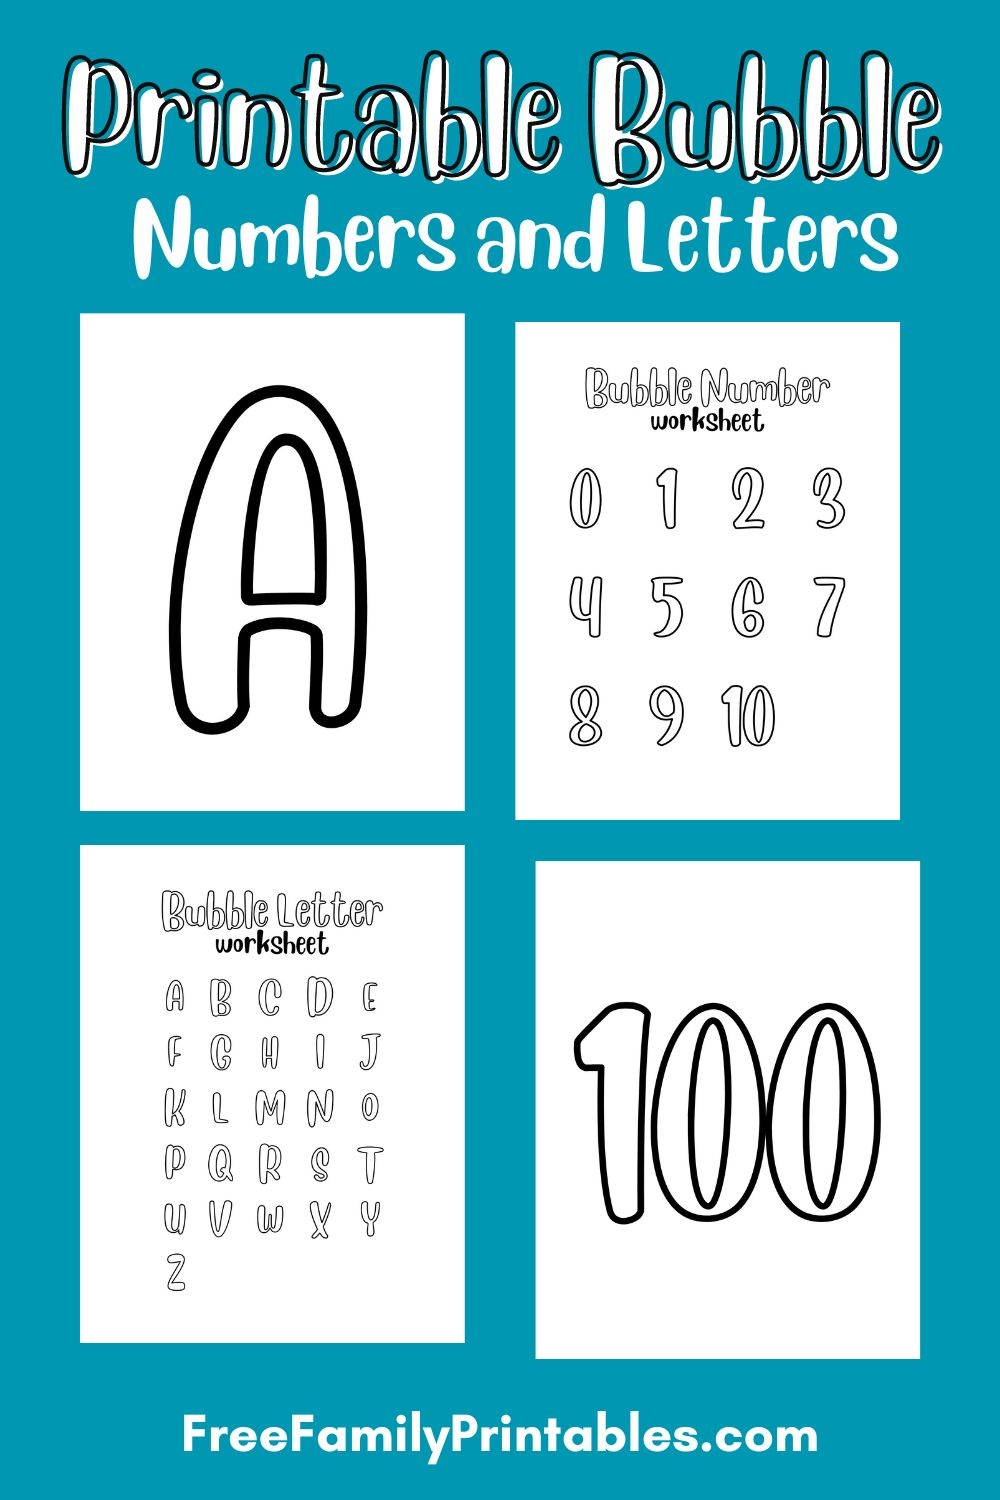 Printable Bubble Numbers 0 100 And Letters A Z Free Family Printables - Free Printable Bubble Numbers